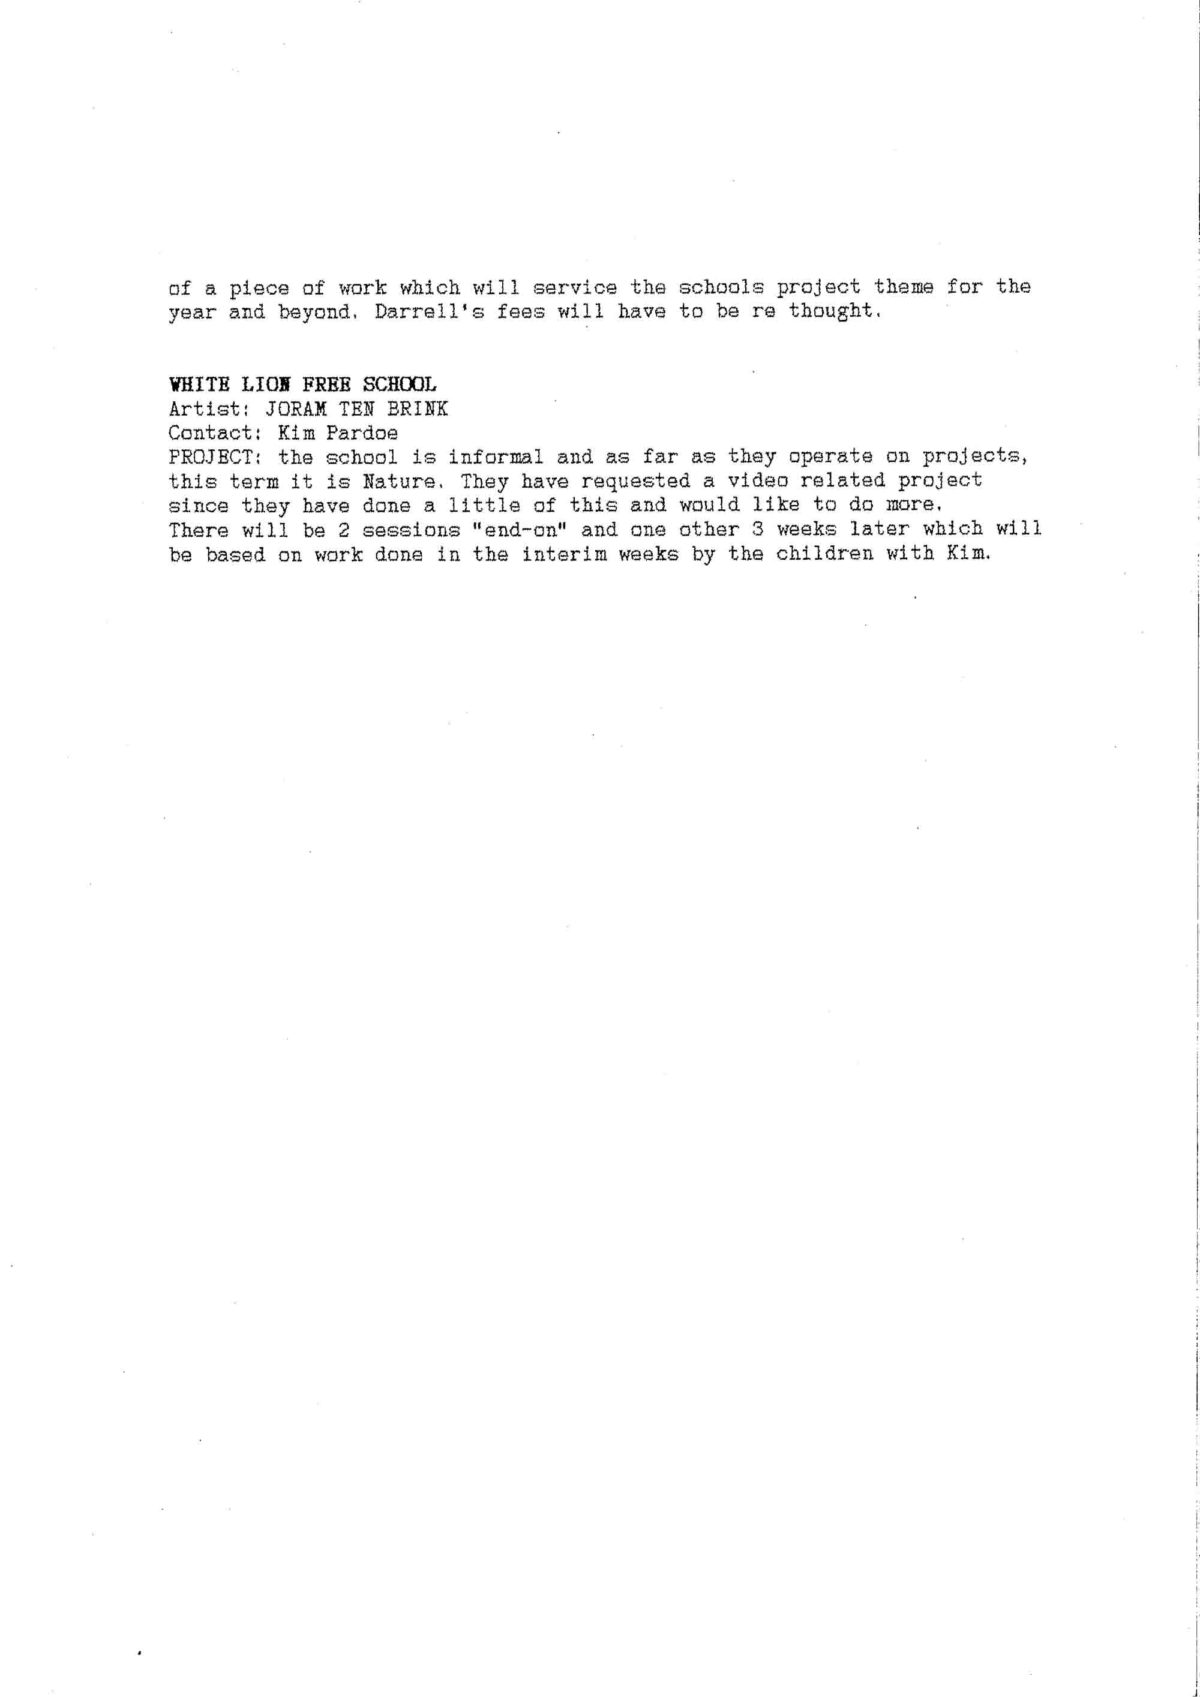 Live Art in Education programme, 1988 (Page 3 of 5)